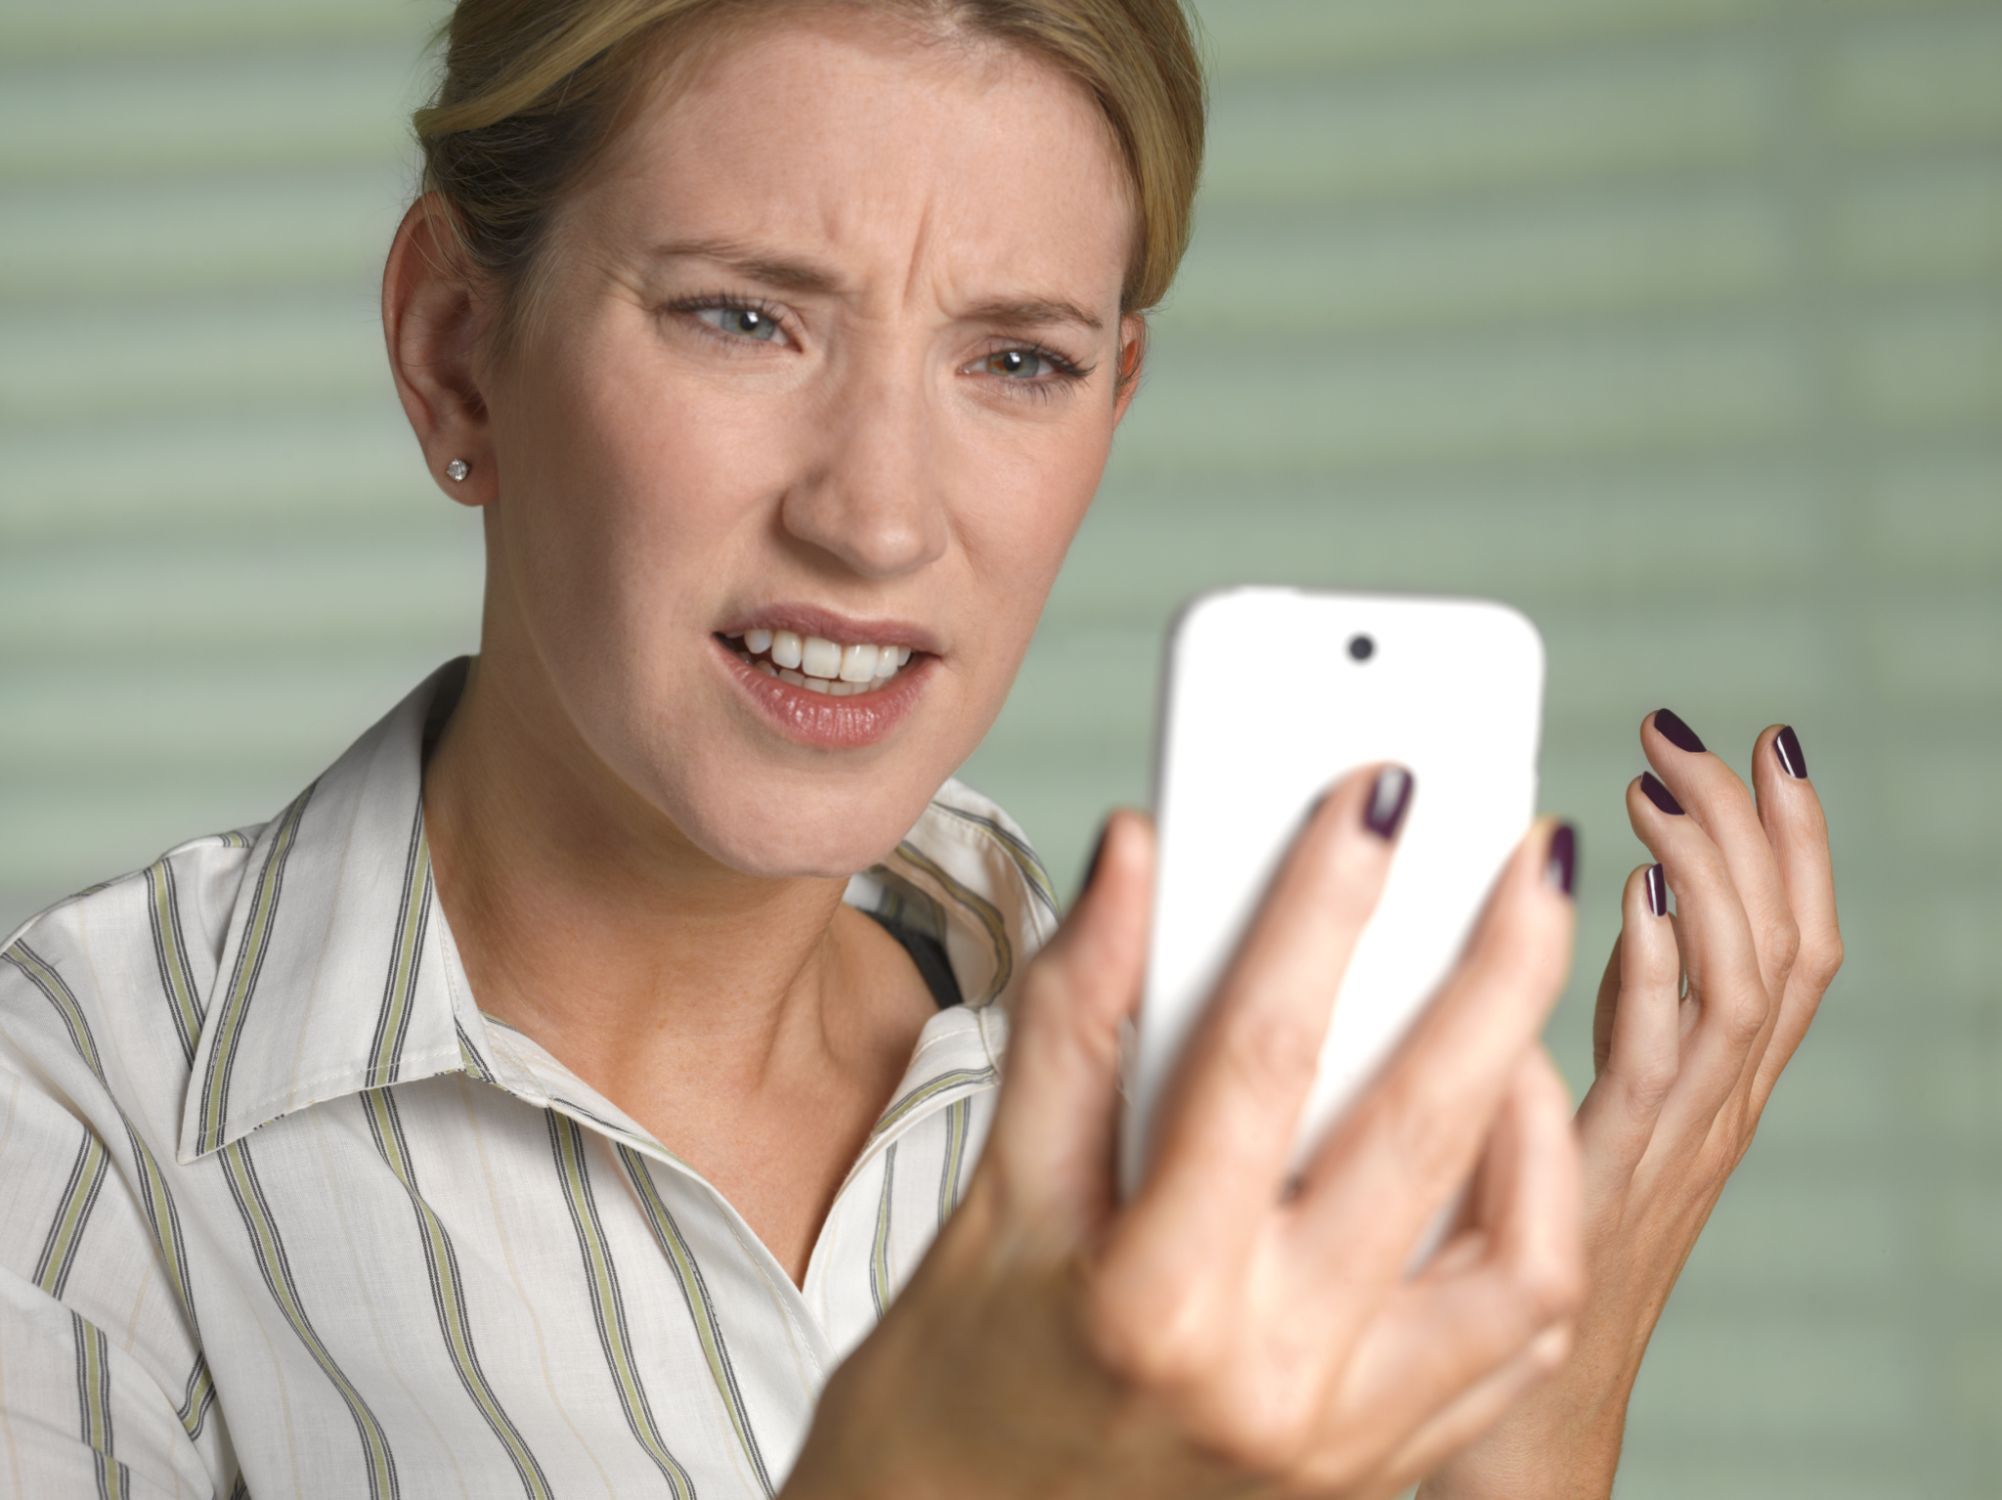 A blonde middle aged woman looks annoyed and confused at a white cellphone